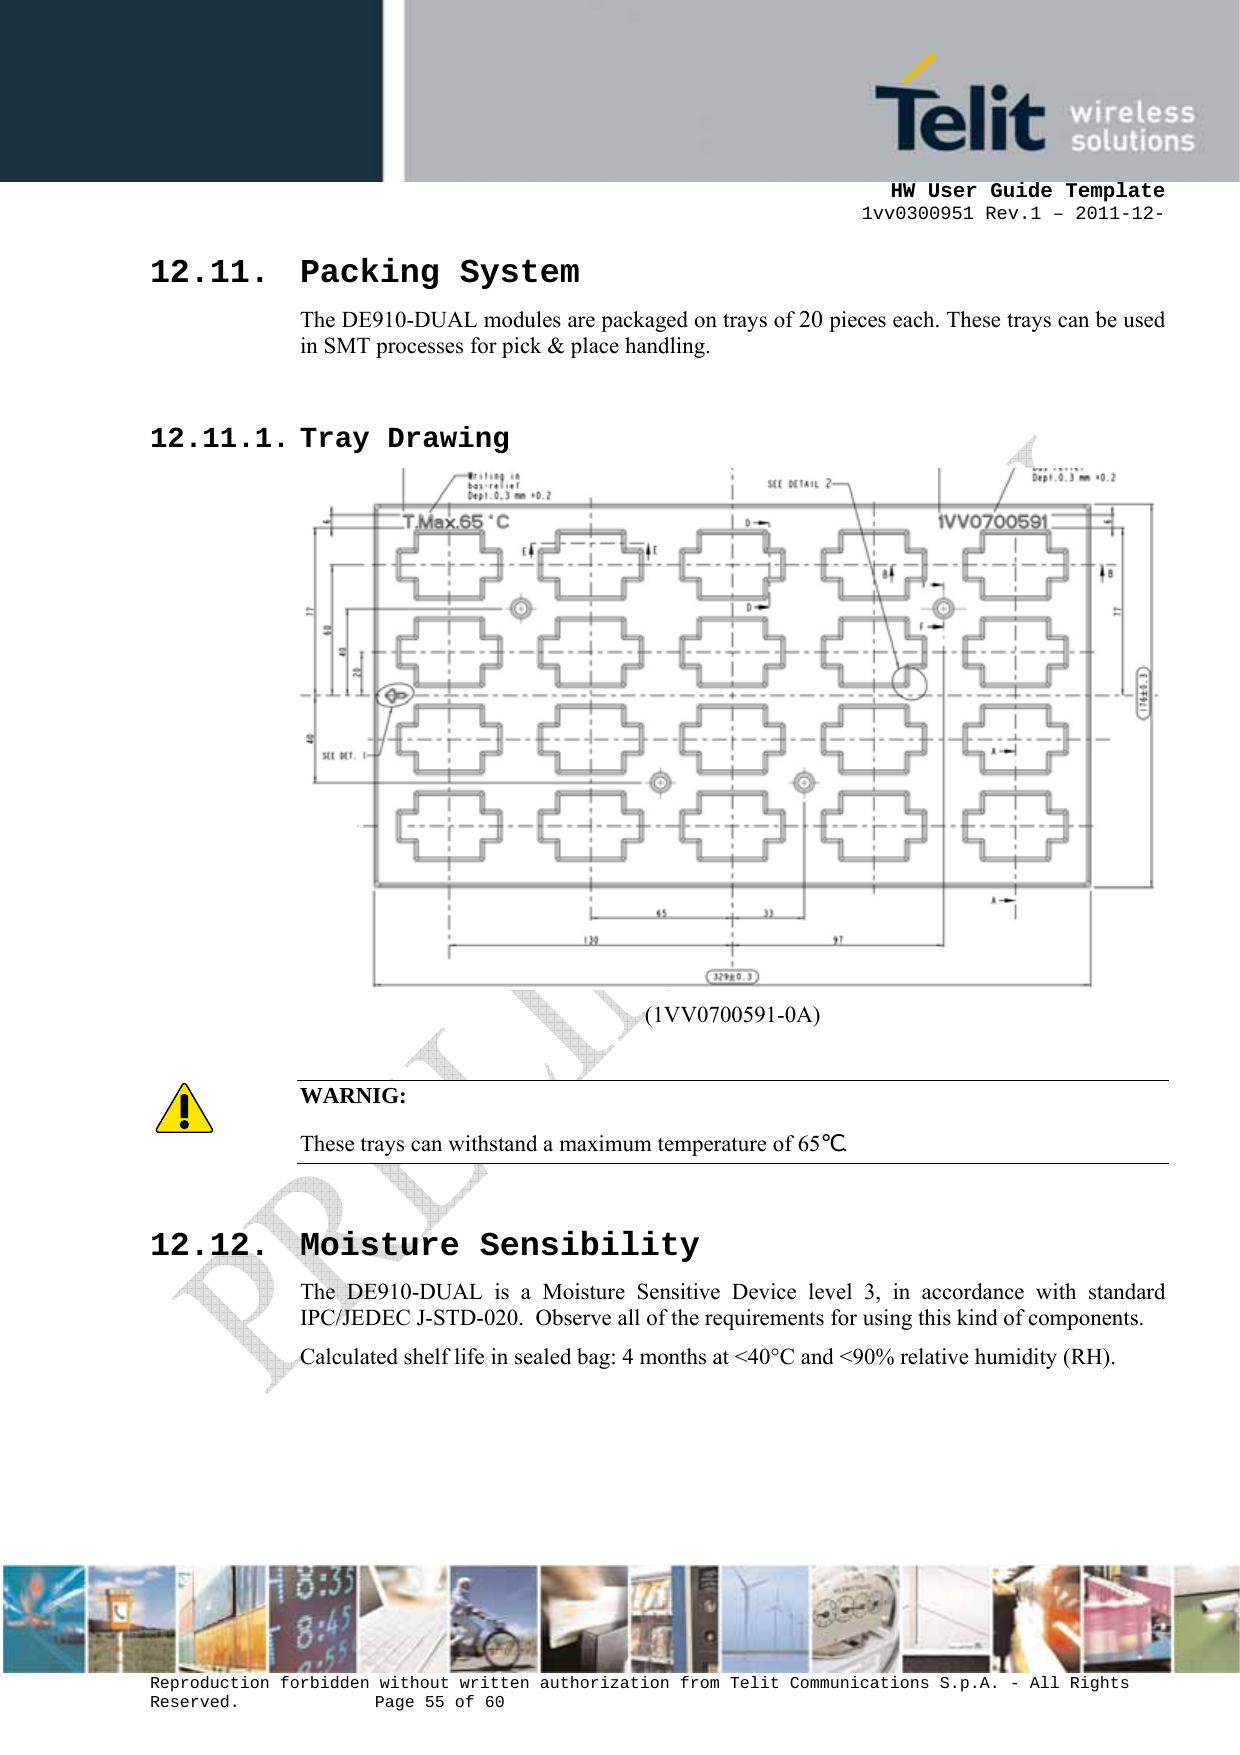      HW User Guide Template 1vv0300951 Rev.1 – 2011-12-  Reproduction forbidden without written authorization from Telit Communications S.p.A. - All Rights Reserved.    Page 55 of 60                                                     12.11. Packing System The DE910-DUAL modules are packaged on trays of 20 pieces each. These trays can be used in SMT processes for pick &amp; place handling.  12.11.1. Tray Drawing  (1VV0700591-0A)  WARNIG: These trays can withstand a maximum temperature of 65℃.   12.12. Moisture Sensibility The DE910-DUAL is a Moisture Sensitive Device level 3, in accordance with standard IPC/JEDEC J-STD-020.  Observe all of the requirements for using this kind of components. Calculated shelf life in sealed bag: 4 months at &lt;40°C and &lt;90% relative humidity (RH).  